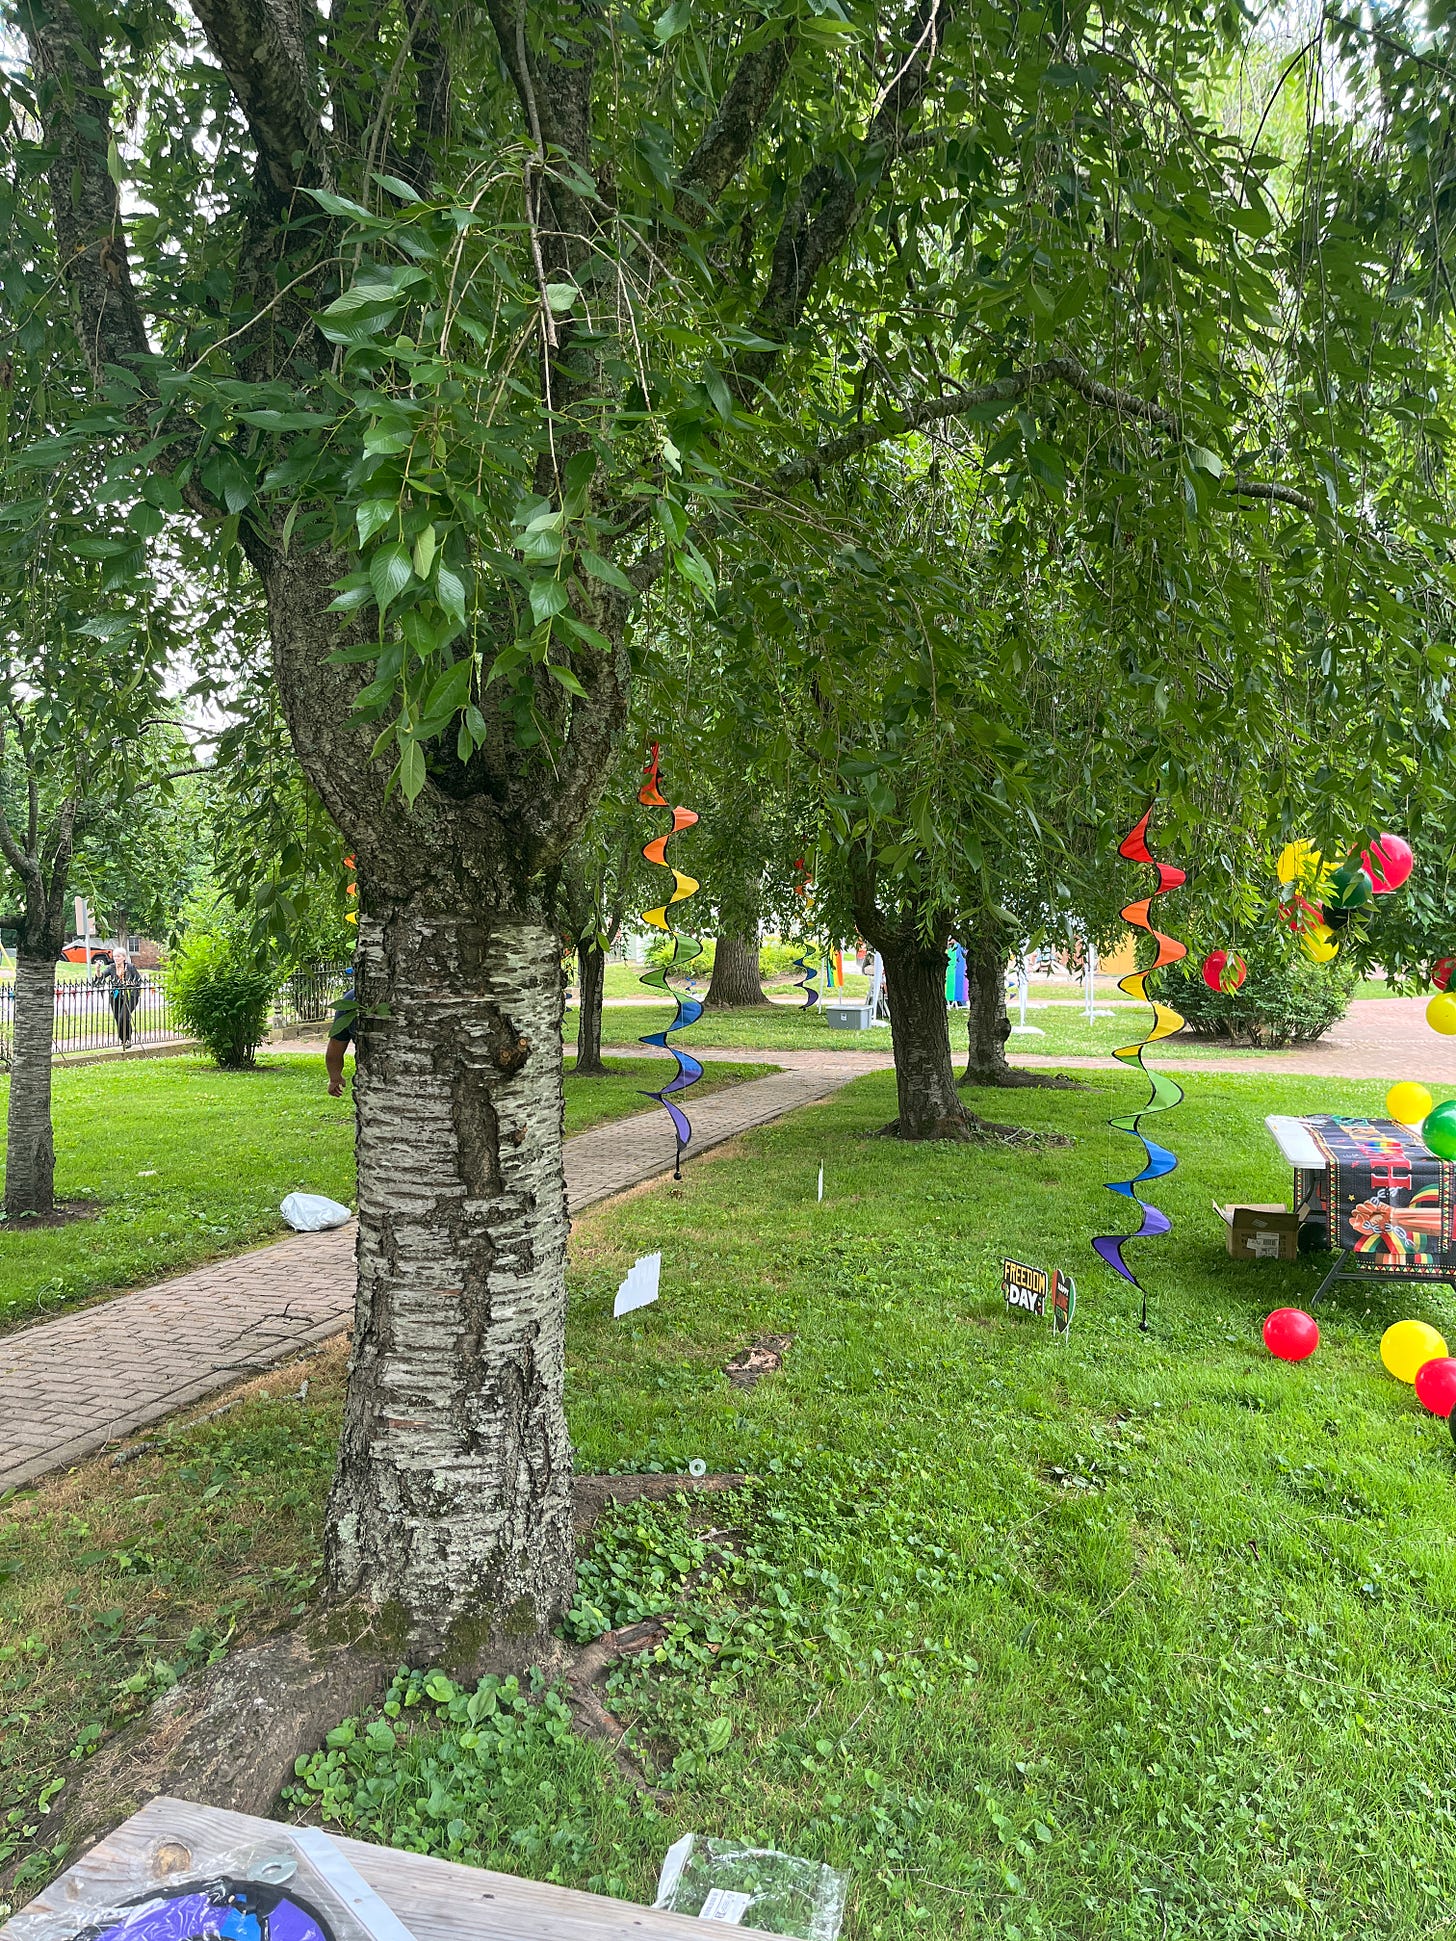 A line of trees, with rainbow squiggle decorations hung from the branches